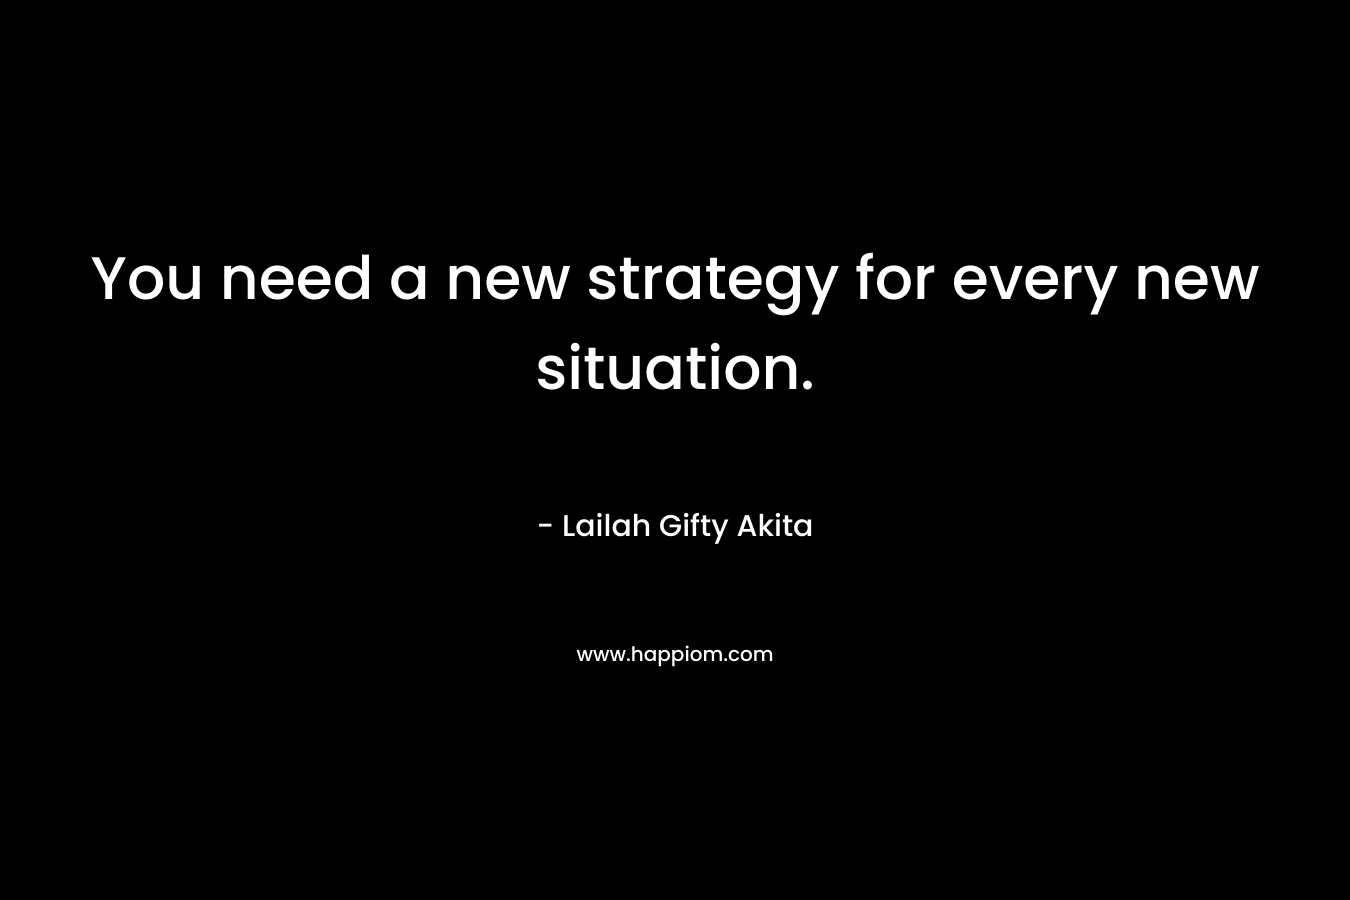 You need a new strategy for every new situation. – Lailah Gifty Akita